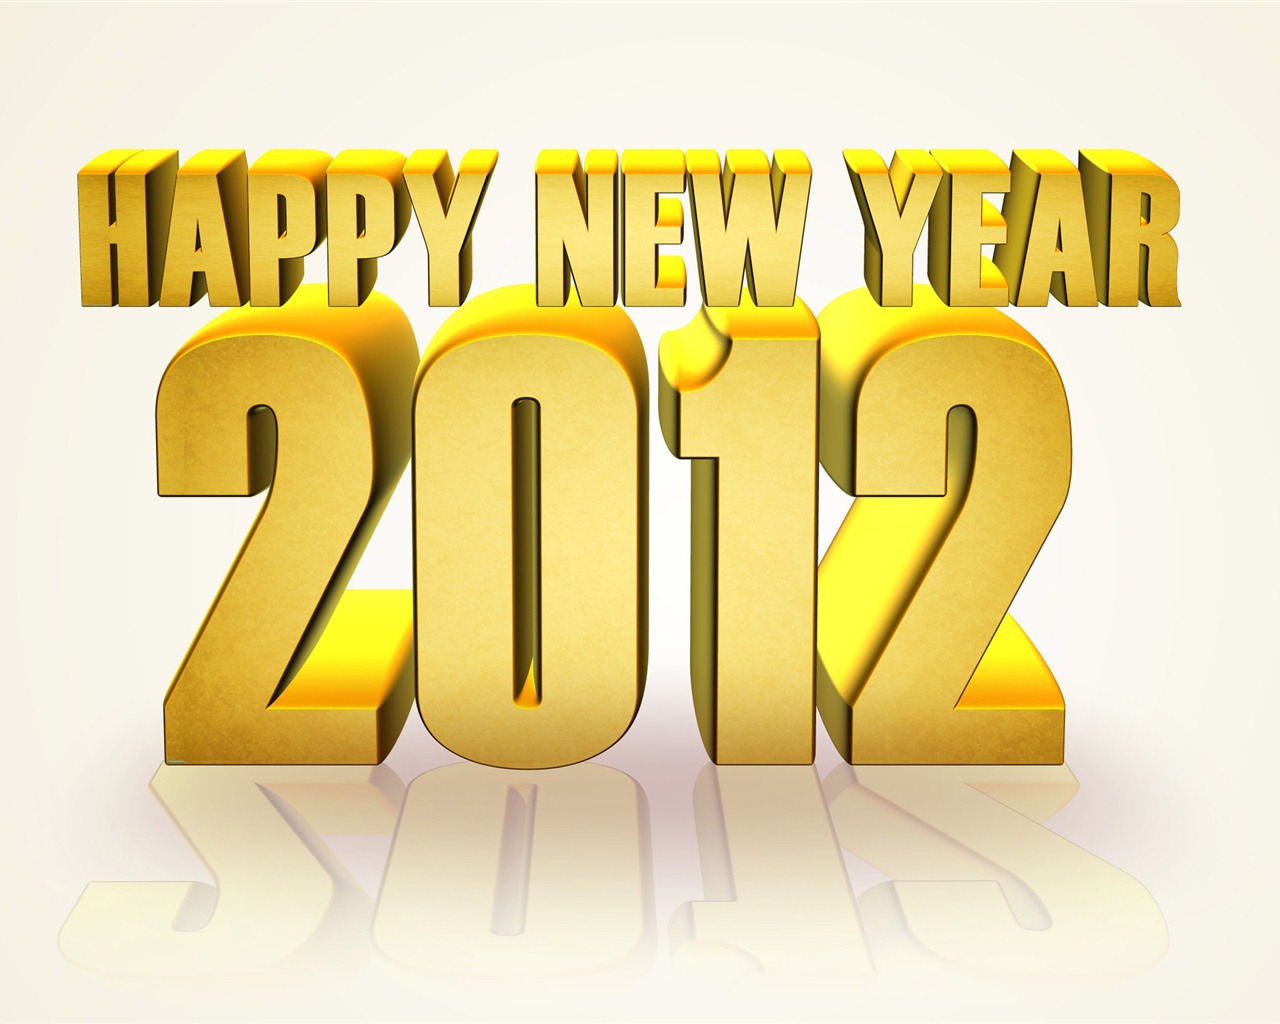 2012 New Year wallpapers (1) #4 - 1280x1024